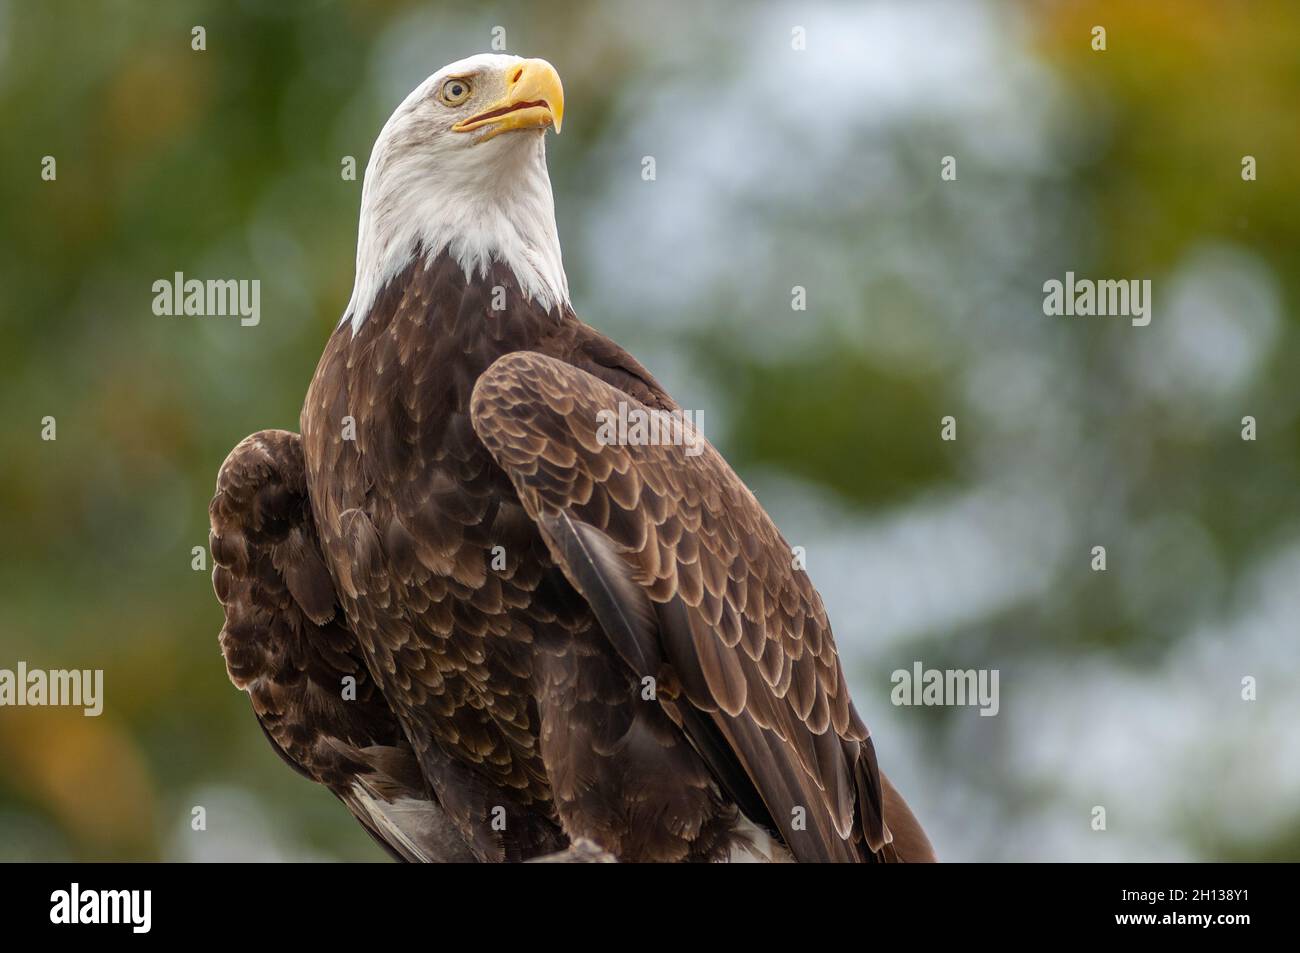 Bald Eagle perched on a branch in a zoo. France. Stock Photo